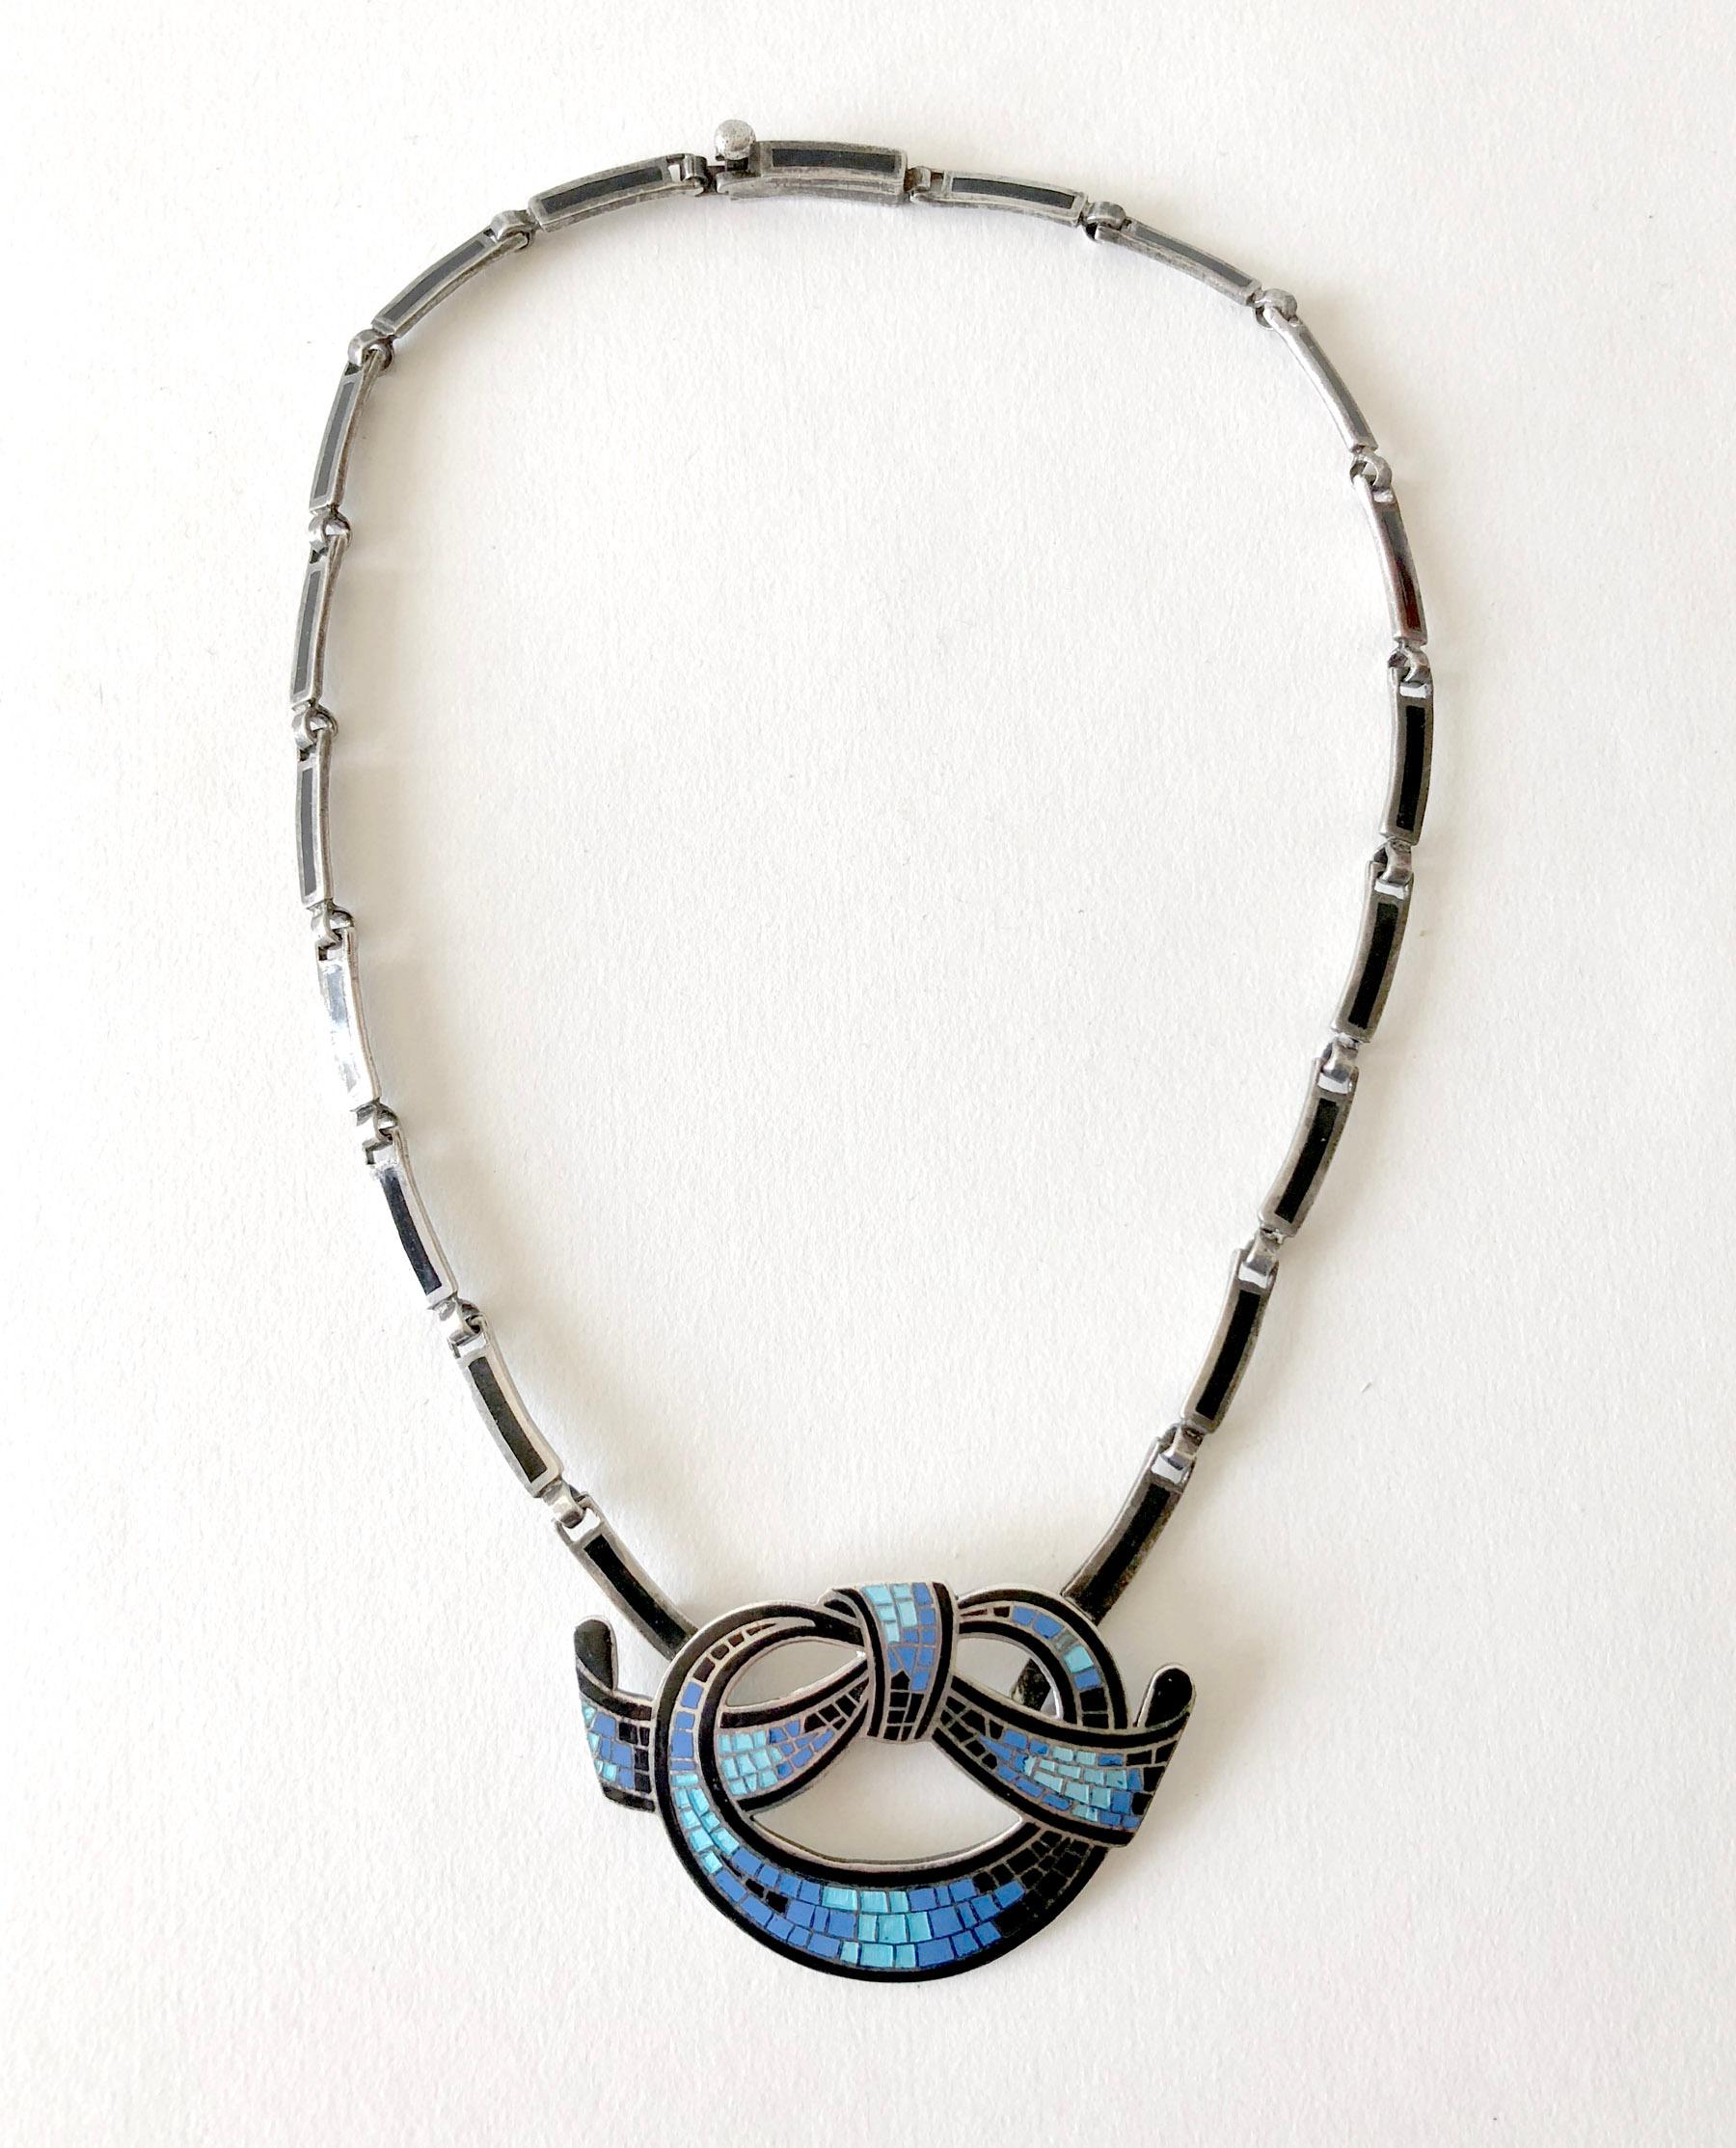 Gorgeous mosaic enameled sterling silver necklace which can convert to a brooch created by Mexican modernist jeweler, Margot de Taxco.  Necklace chain measures 16